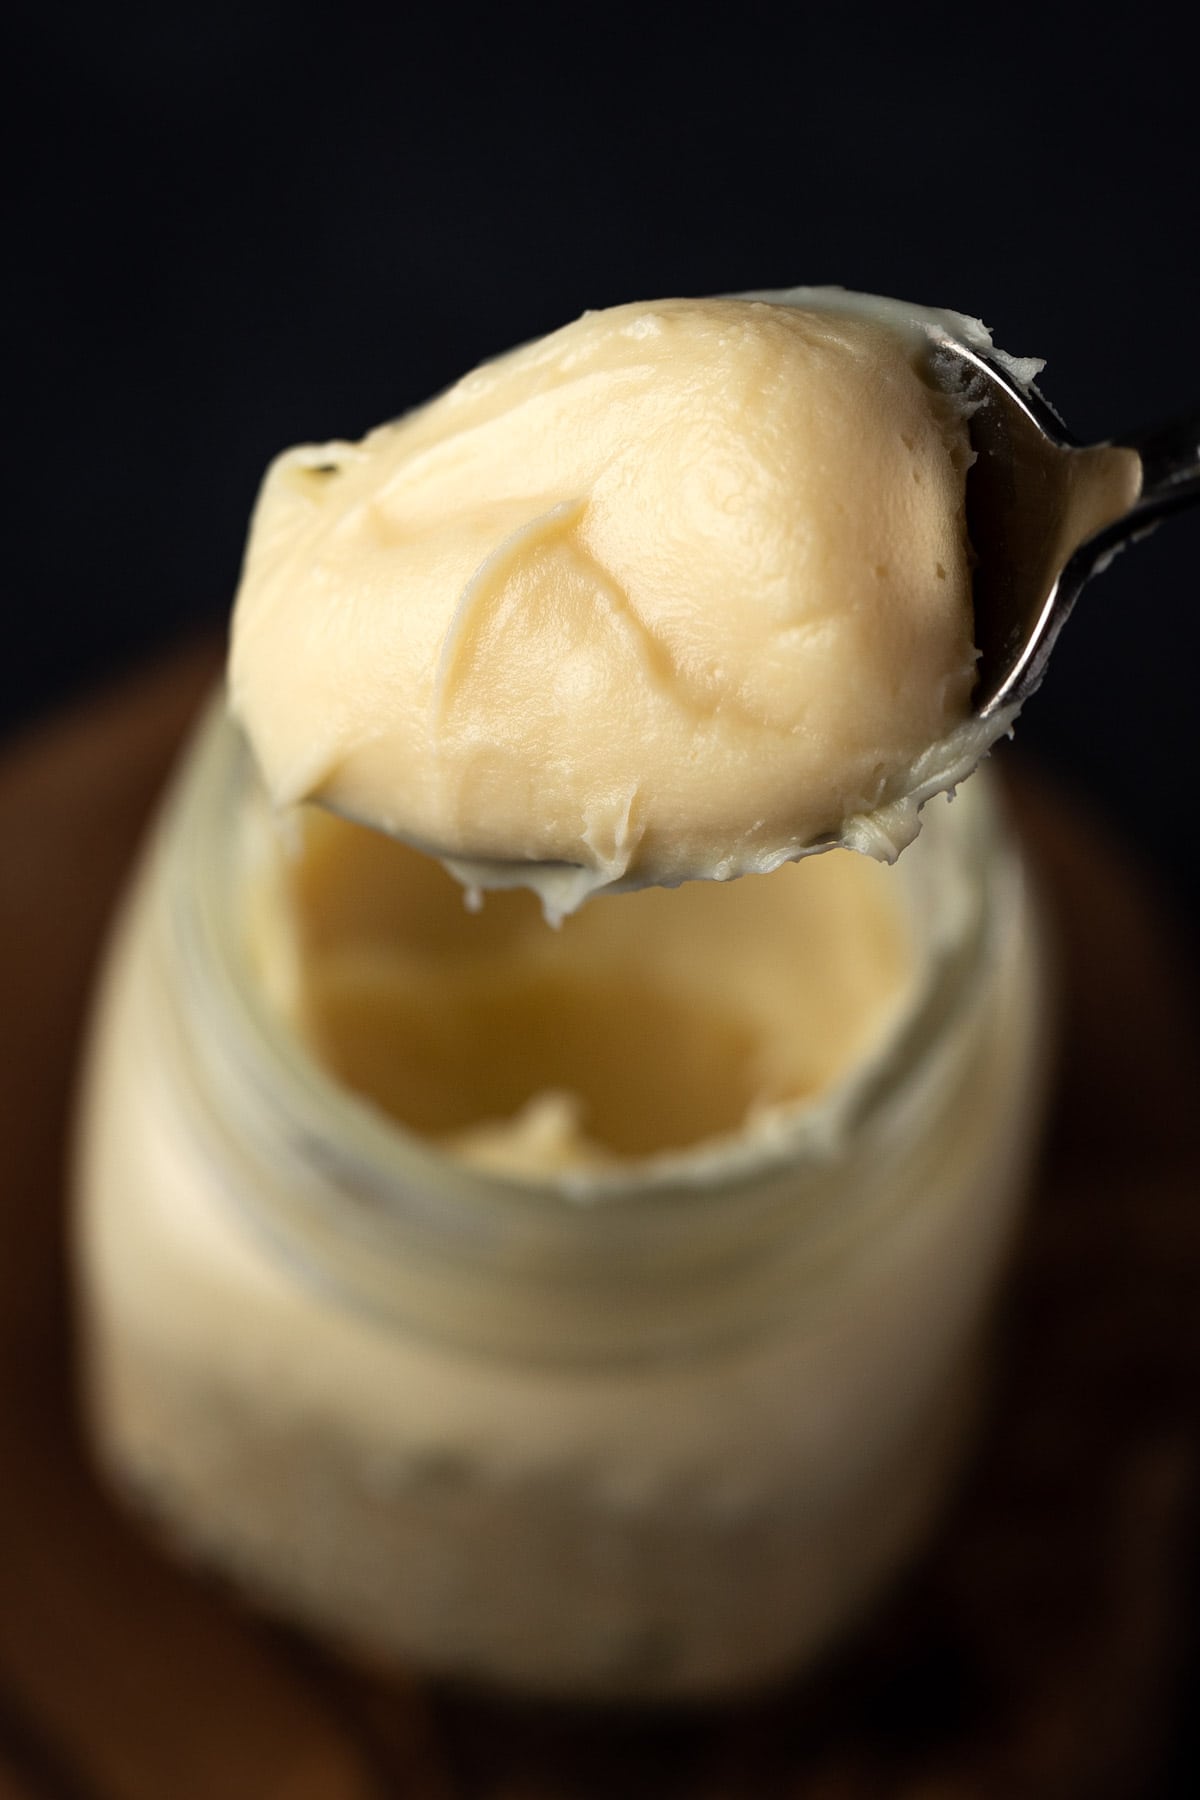 Close up view of a spoonful of yellow lemon ganache.